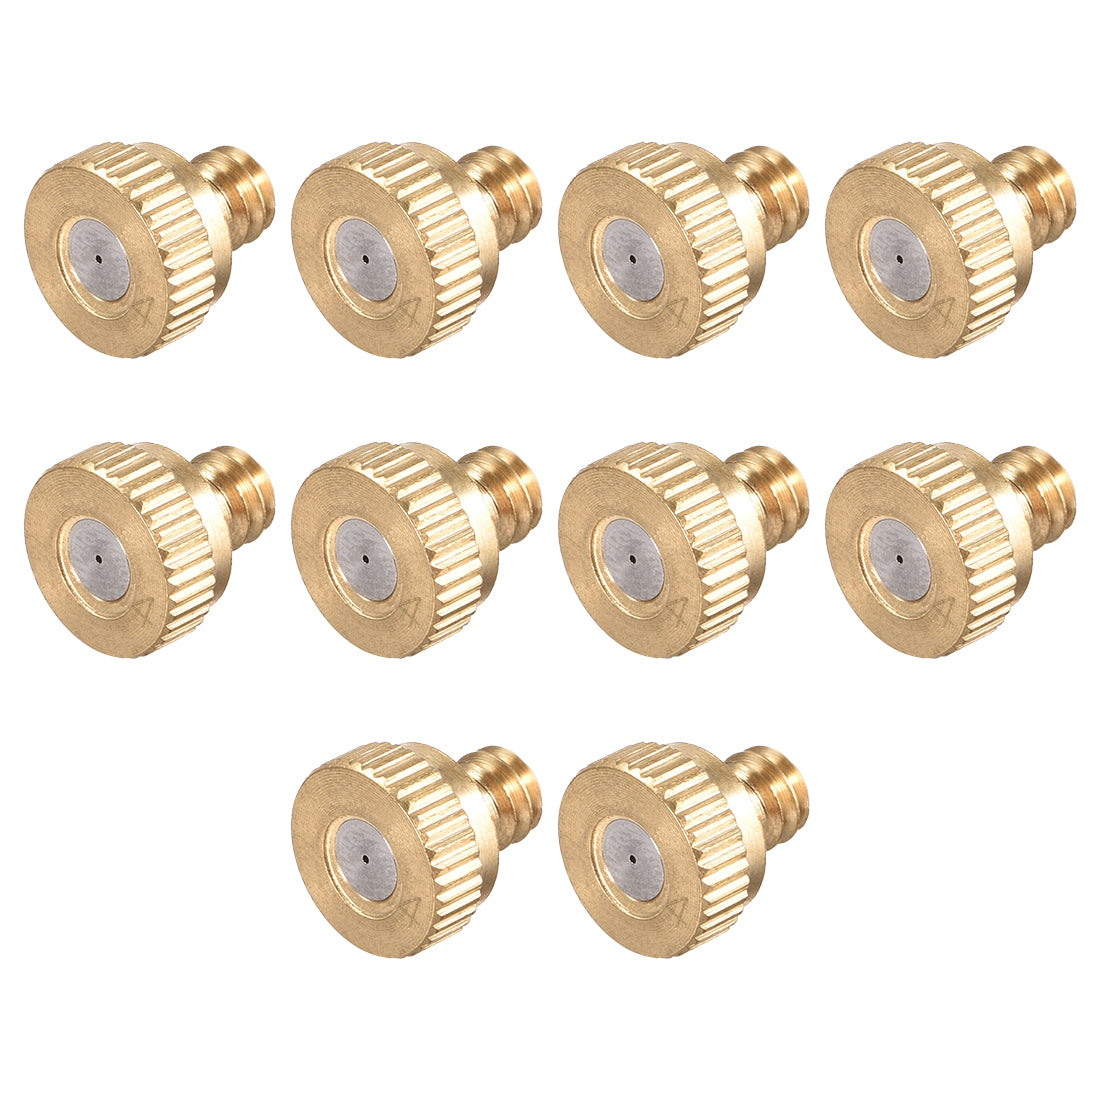 uxcell Uxcell Brass Misting Nozzle - 10/24 UNC Replacement Heads for Outdoor Cooling System - 10 Pcs